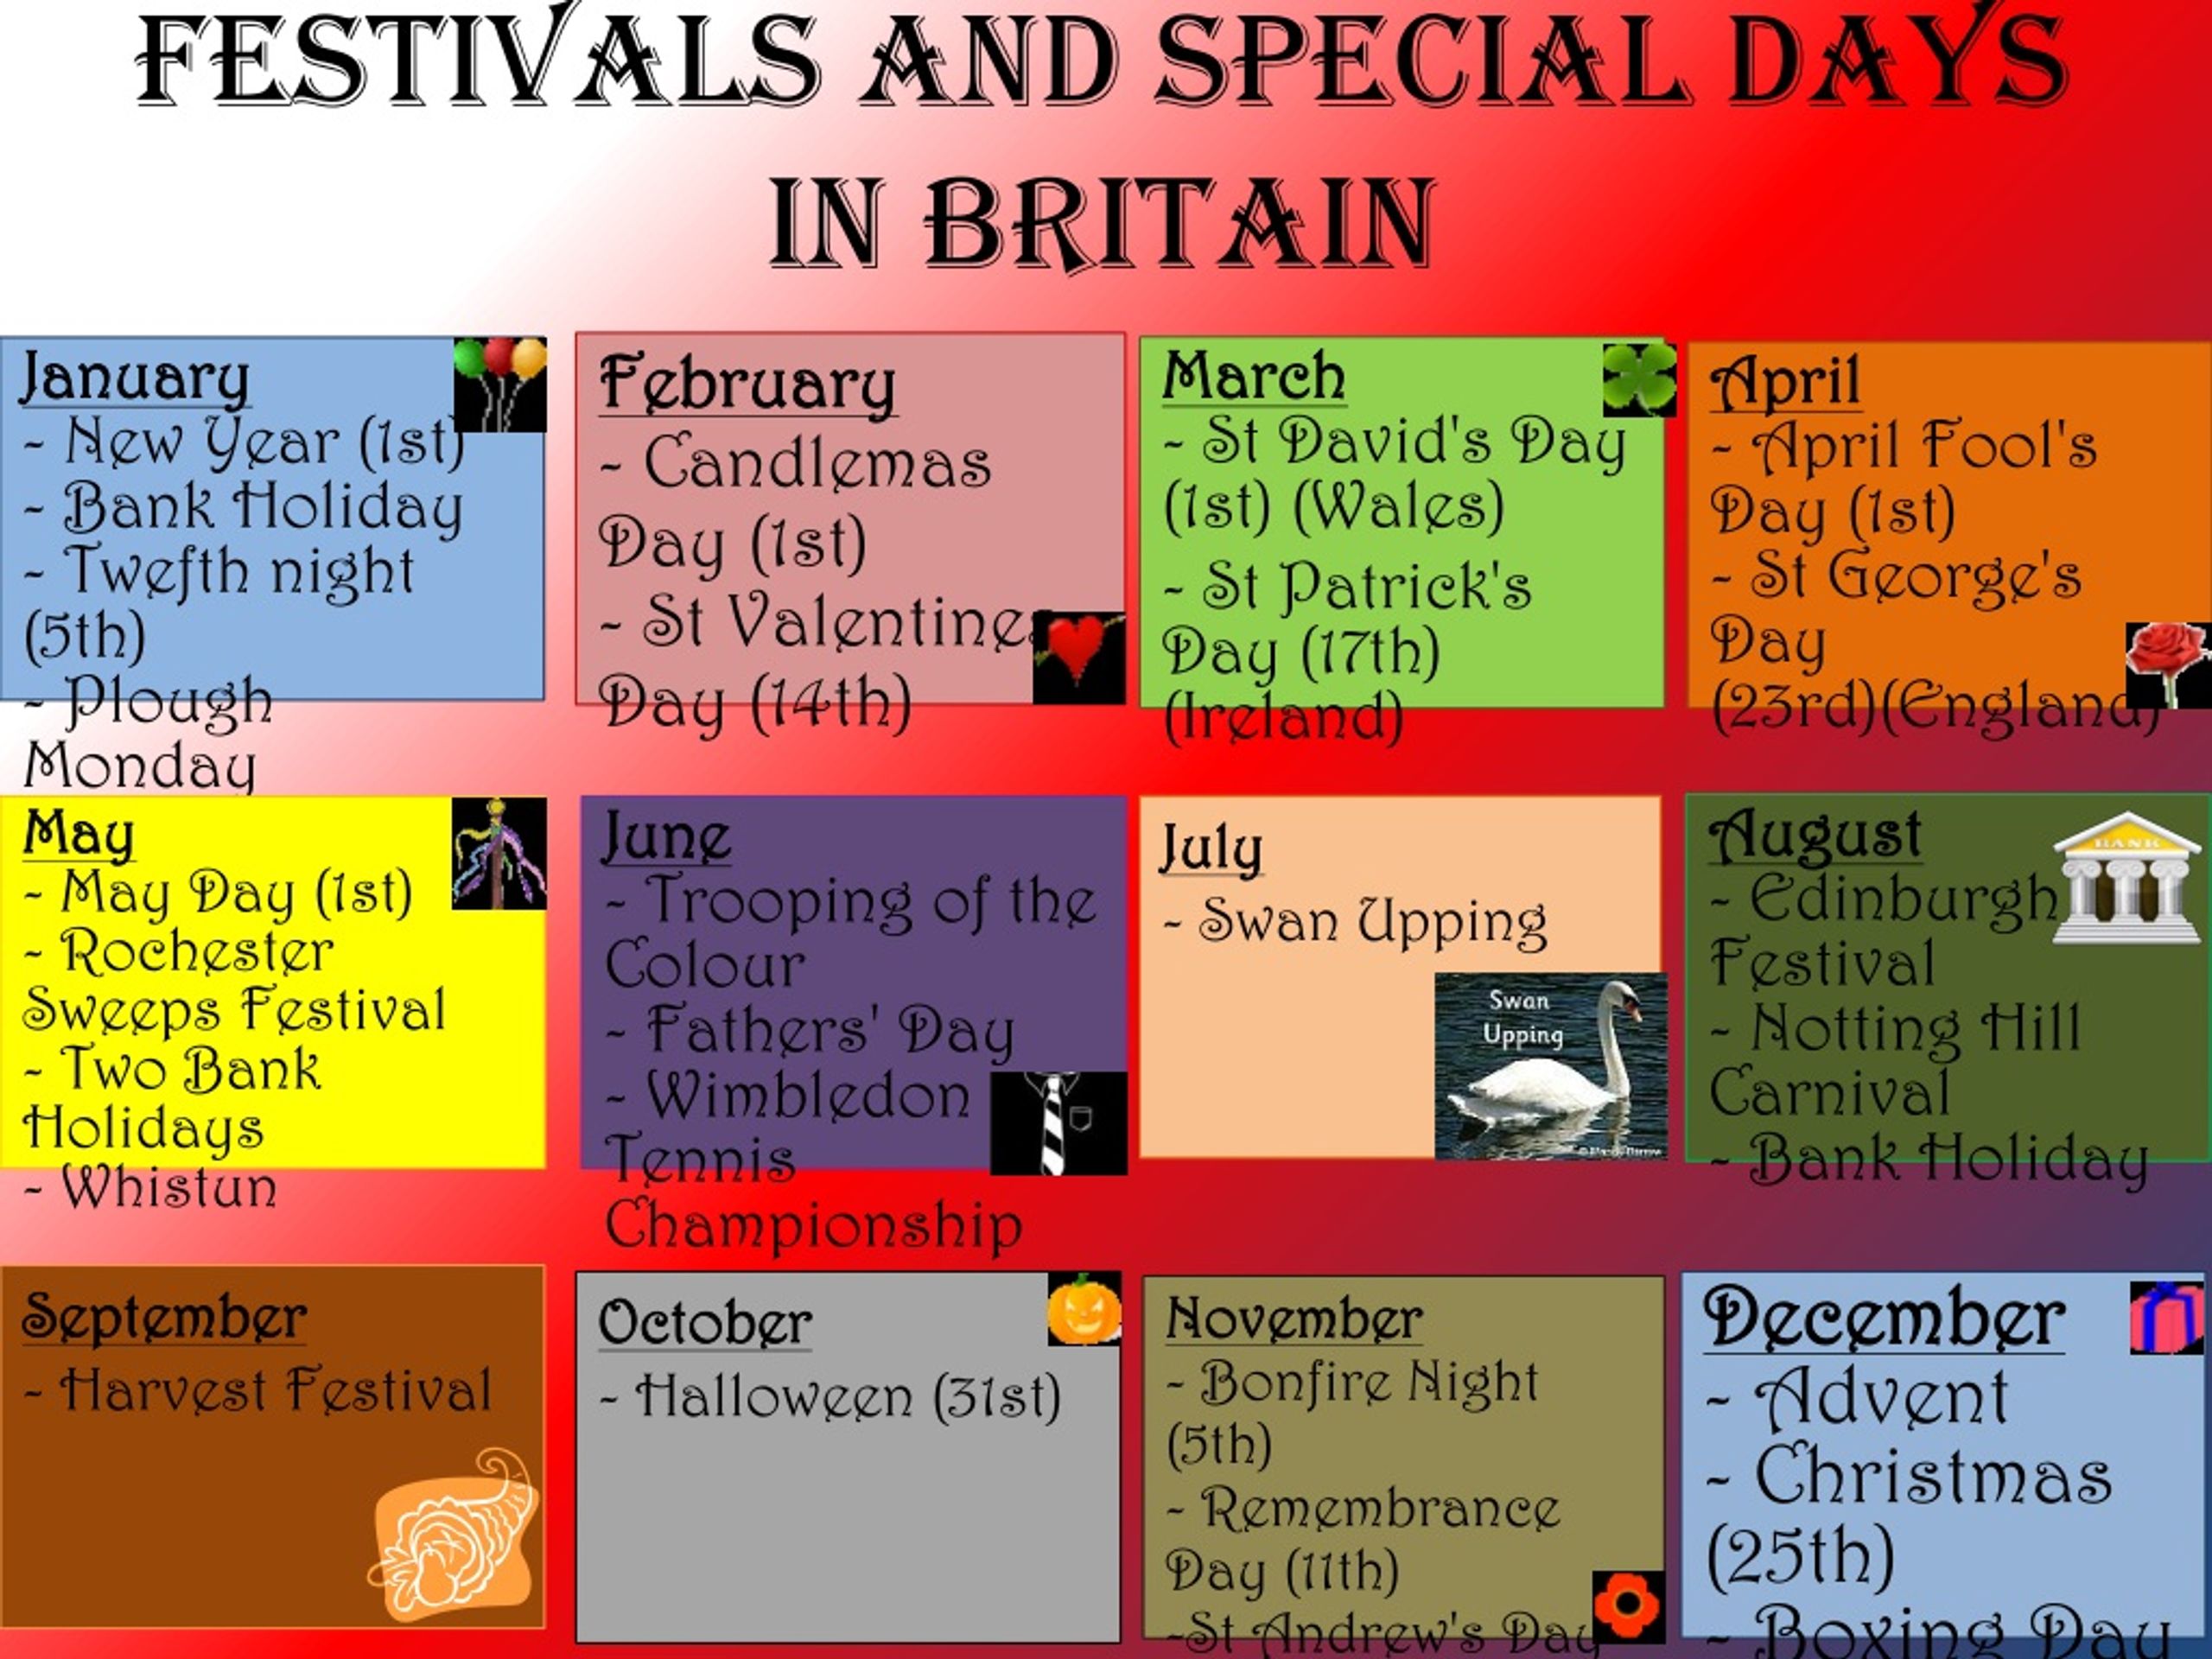 Holidays in your country. Праздники на английском языке. British Holidays задания. Holidays and Festivals in Britain. Holidays in great Britain таблица.